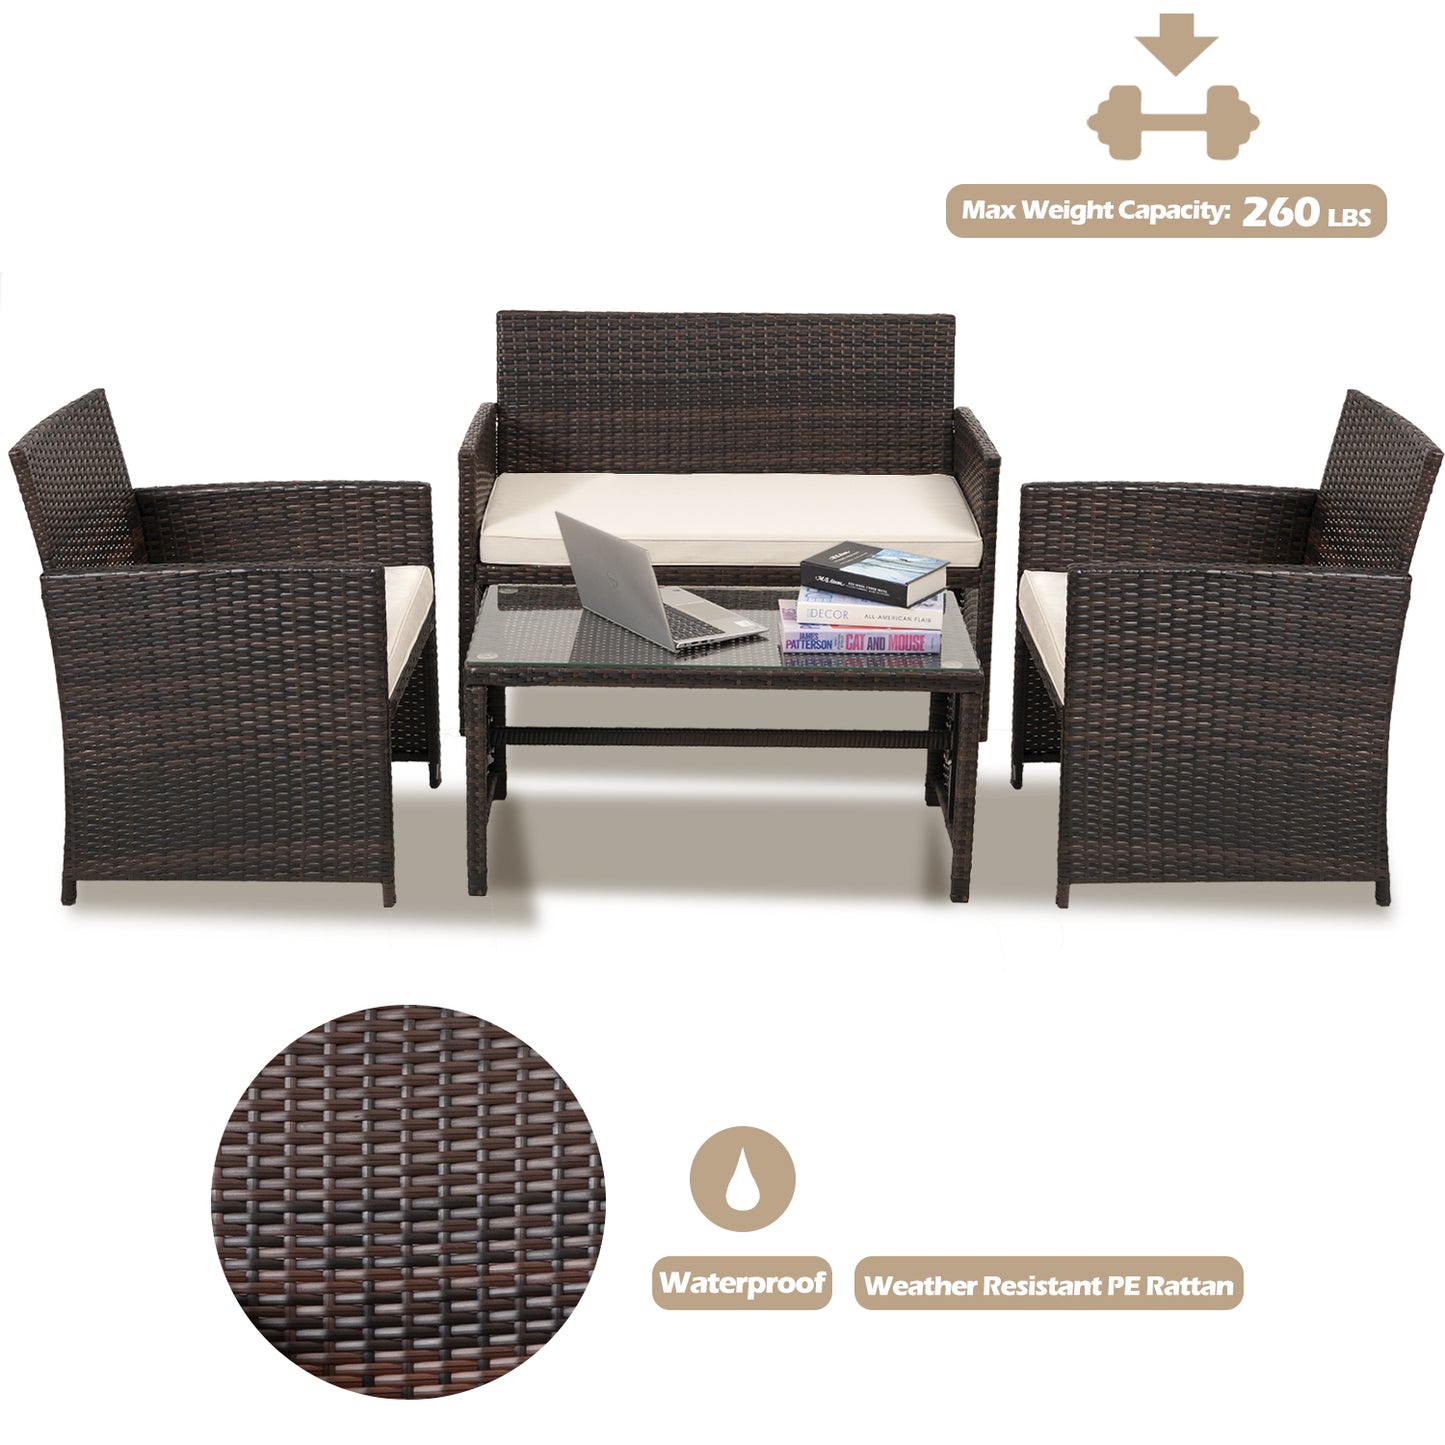 Cpintltr 4 Pieces Outdoor Wicker Furniture Sets